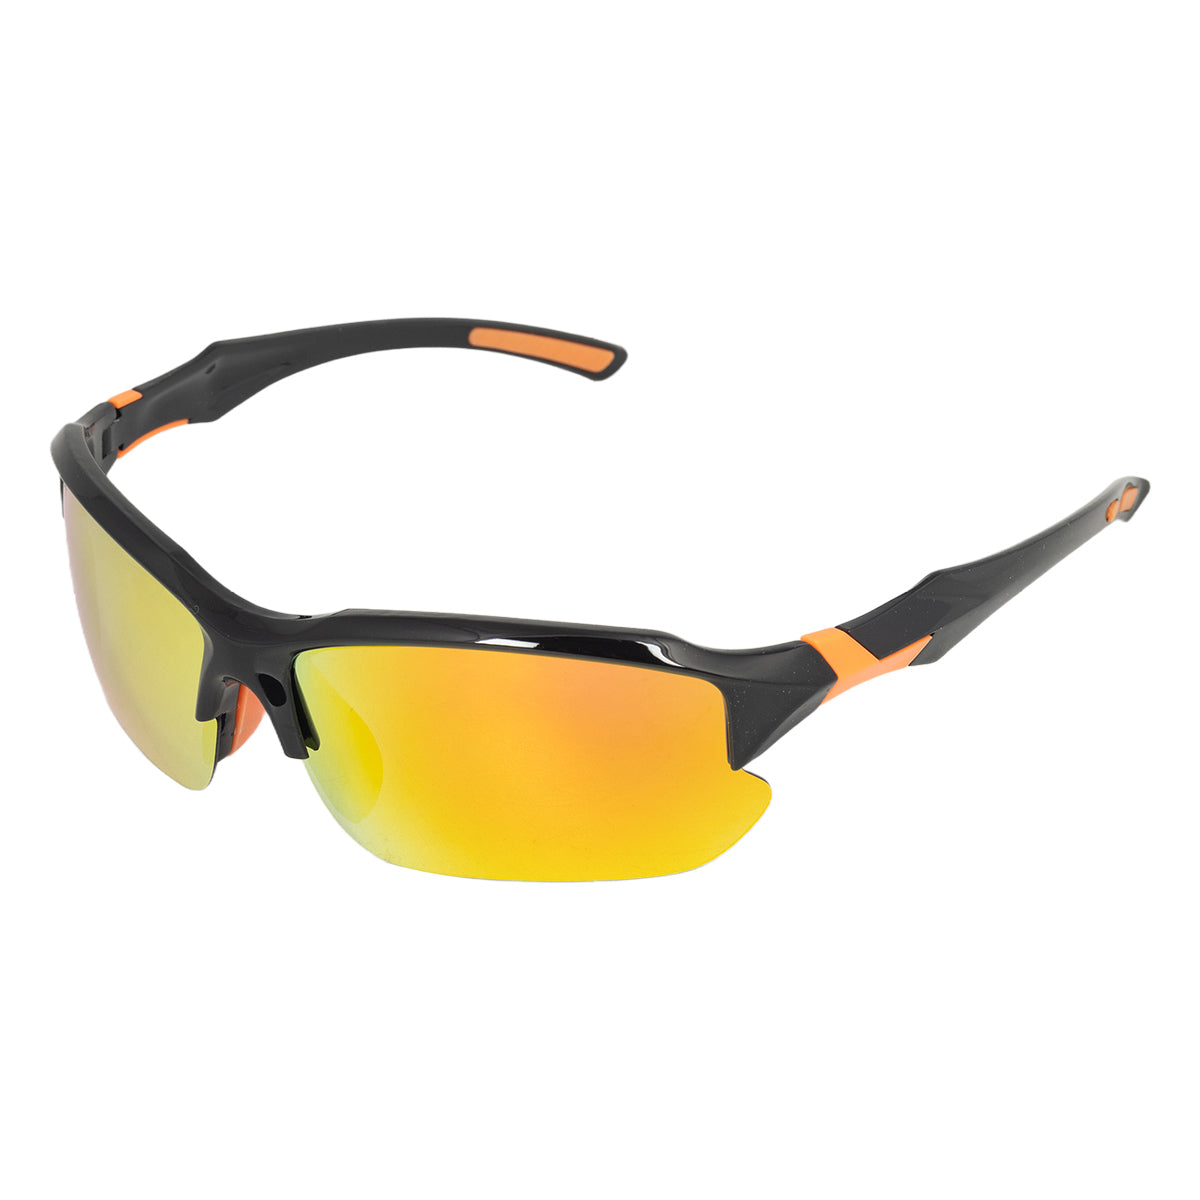 Aceviner Active Sunglasses (Polarized Protection)